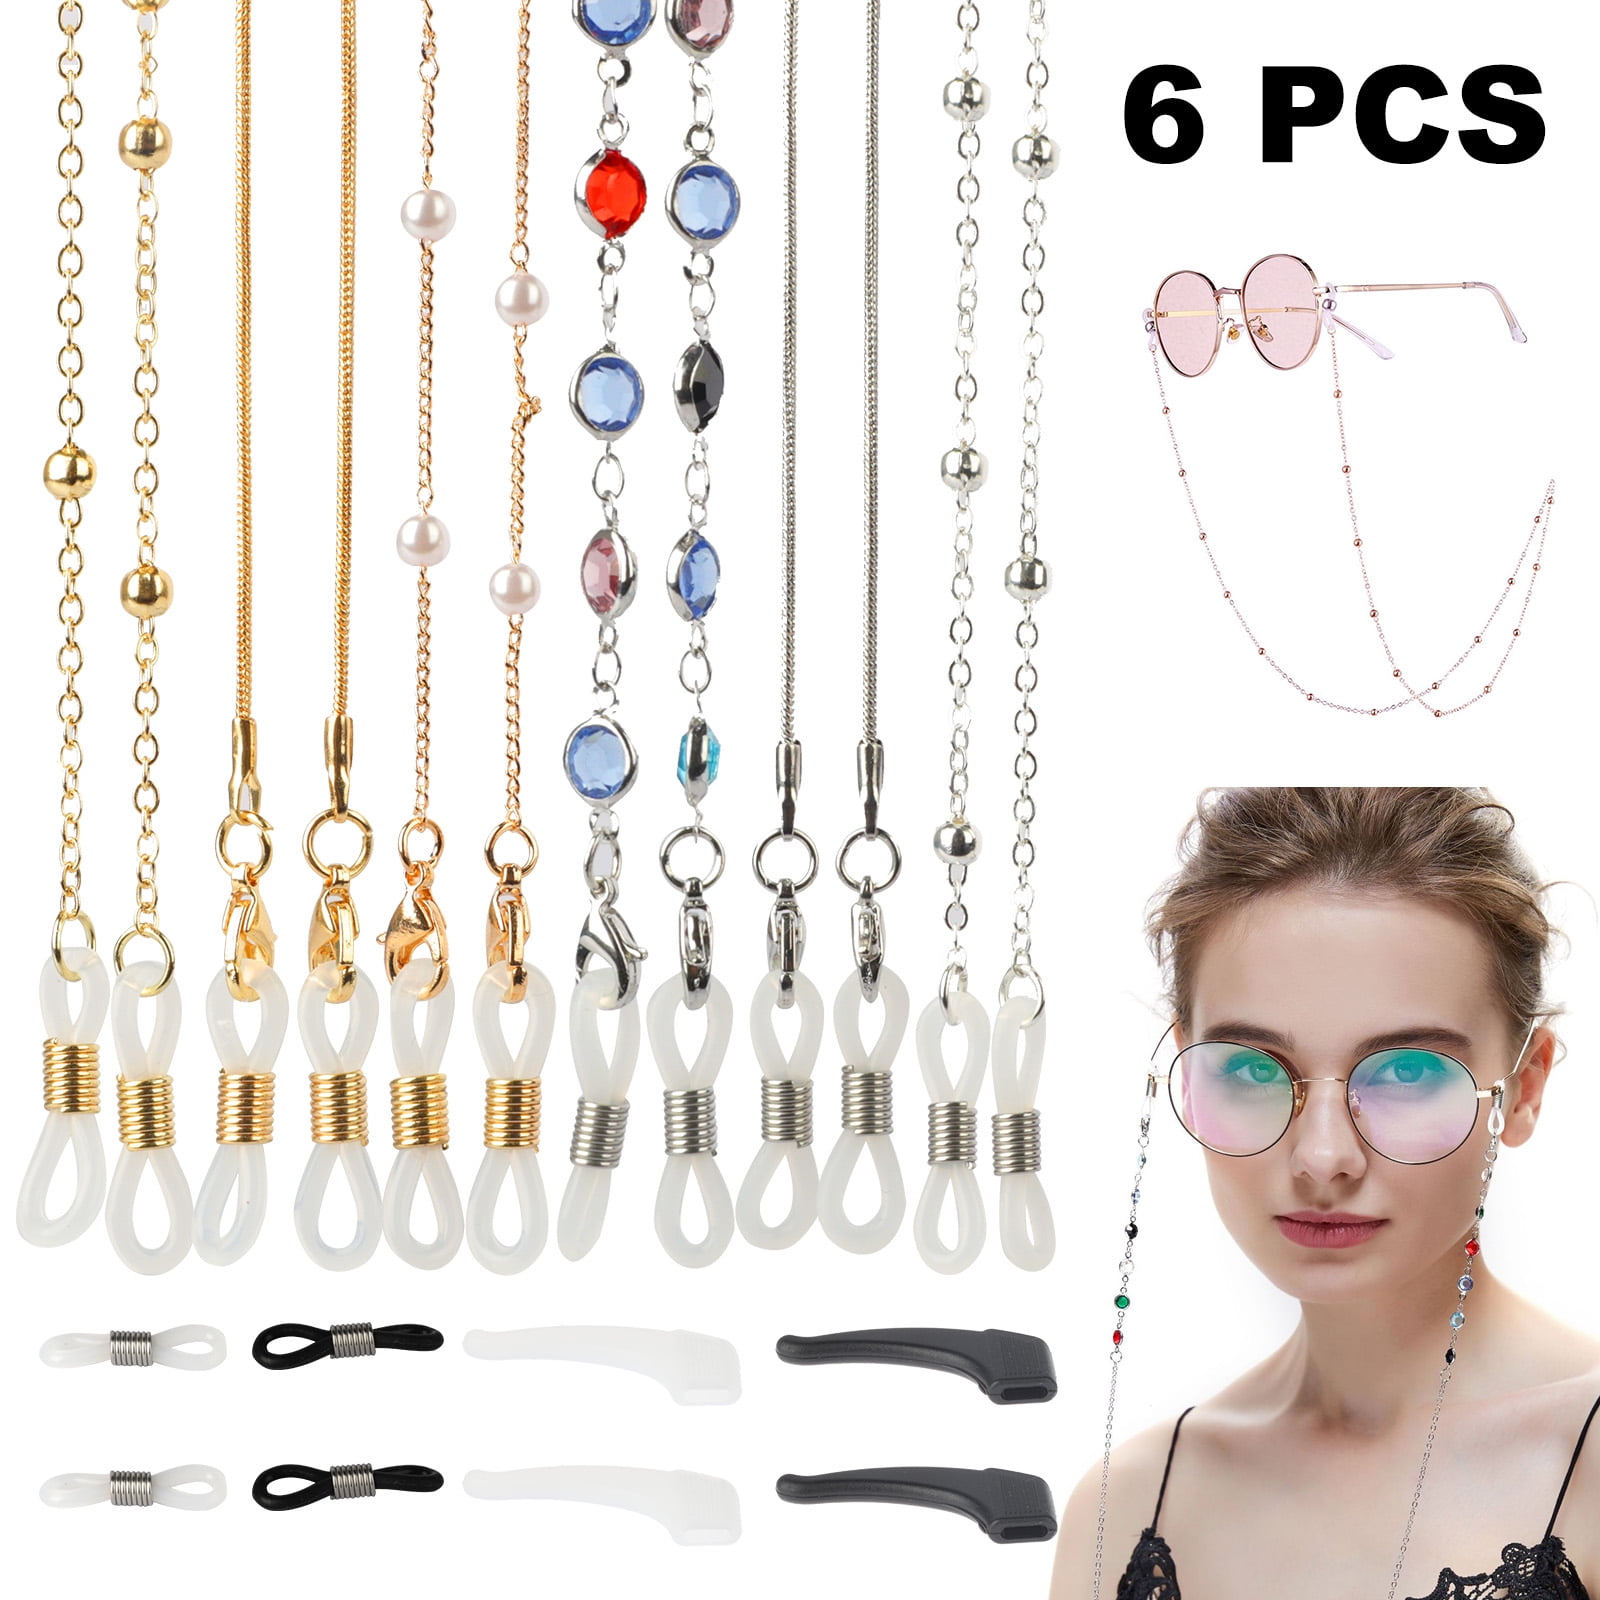 8 Pieces Eyeglasses Chains Strap Holder Stylish Eyewear Retainer Chain Beaded Eyeglasses Sunglasses Strap Holder Necklace Face Mask Holder Chains with Clips Silicone Loops